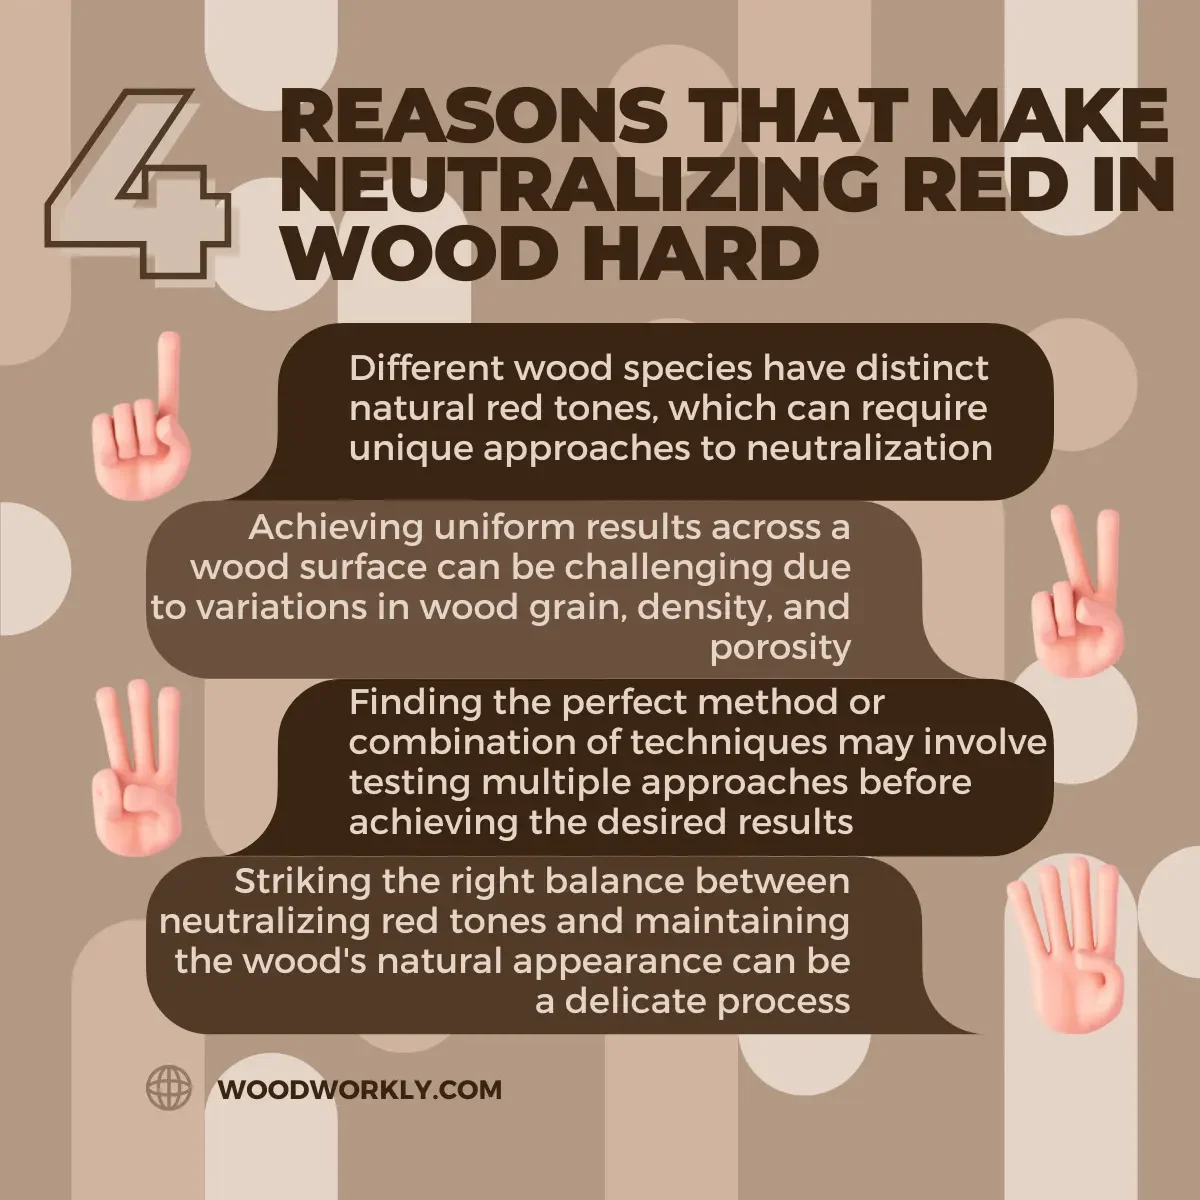 Reasons that make neutralizing red in wood hard